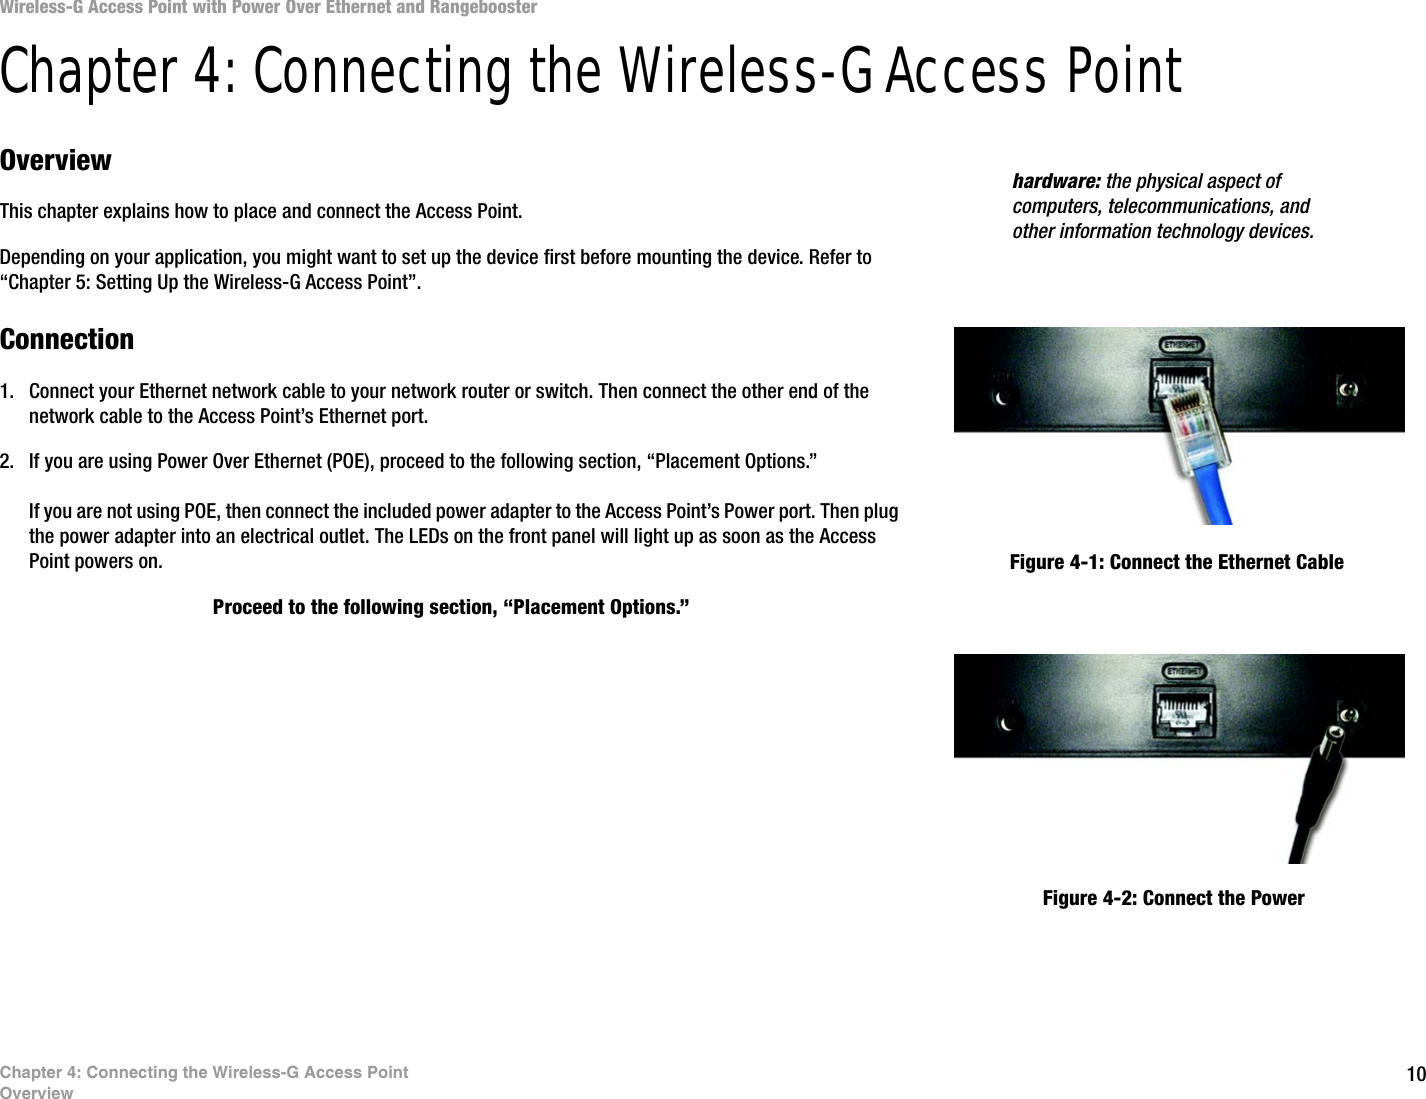 10Chapter 4: Connecting the Wireless-G Access PointOverviewWireless-G Access Point with Power Over Ethernet and RangeboosterChapter 4: Connecting the Wireless-G Access PointOverviewThis chapter explains how to place and connect the Access Point. Depending on your application, you might want to set up the device first before mounting the device. Refer to “Chapter 5: Setting Up the Wireless-G Access Point”.Connection1. Connect your Ethernet network cable to your network router or switch. Then connect the other end of the network cable to the Access Point’s Ethernet port.2. If you are using Power Over Ethernet (POE), proceed to the following section, “Placement Options.”If you are not using POE, then connect the included power adapter to the Access Point’s Power port. Then plug the power adapter into an electrical outlet. The LEDs on the front panel will light up as soon as the Access Point powers on.Proceed to the following section, “Placement Options.”hardware: the physical aspect of computers, telecommunications, and other information technology devices.Figure 4-1: Connect the Ethernet CableFigure 4-2: Connect the Power